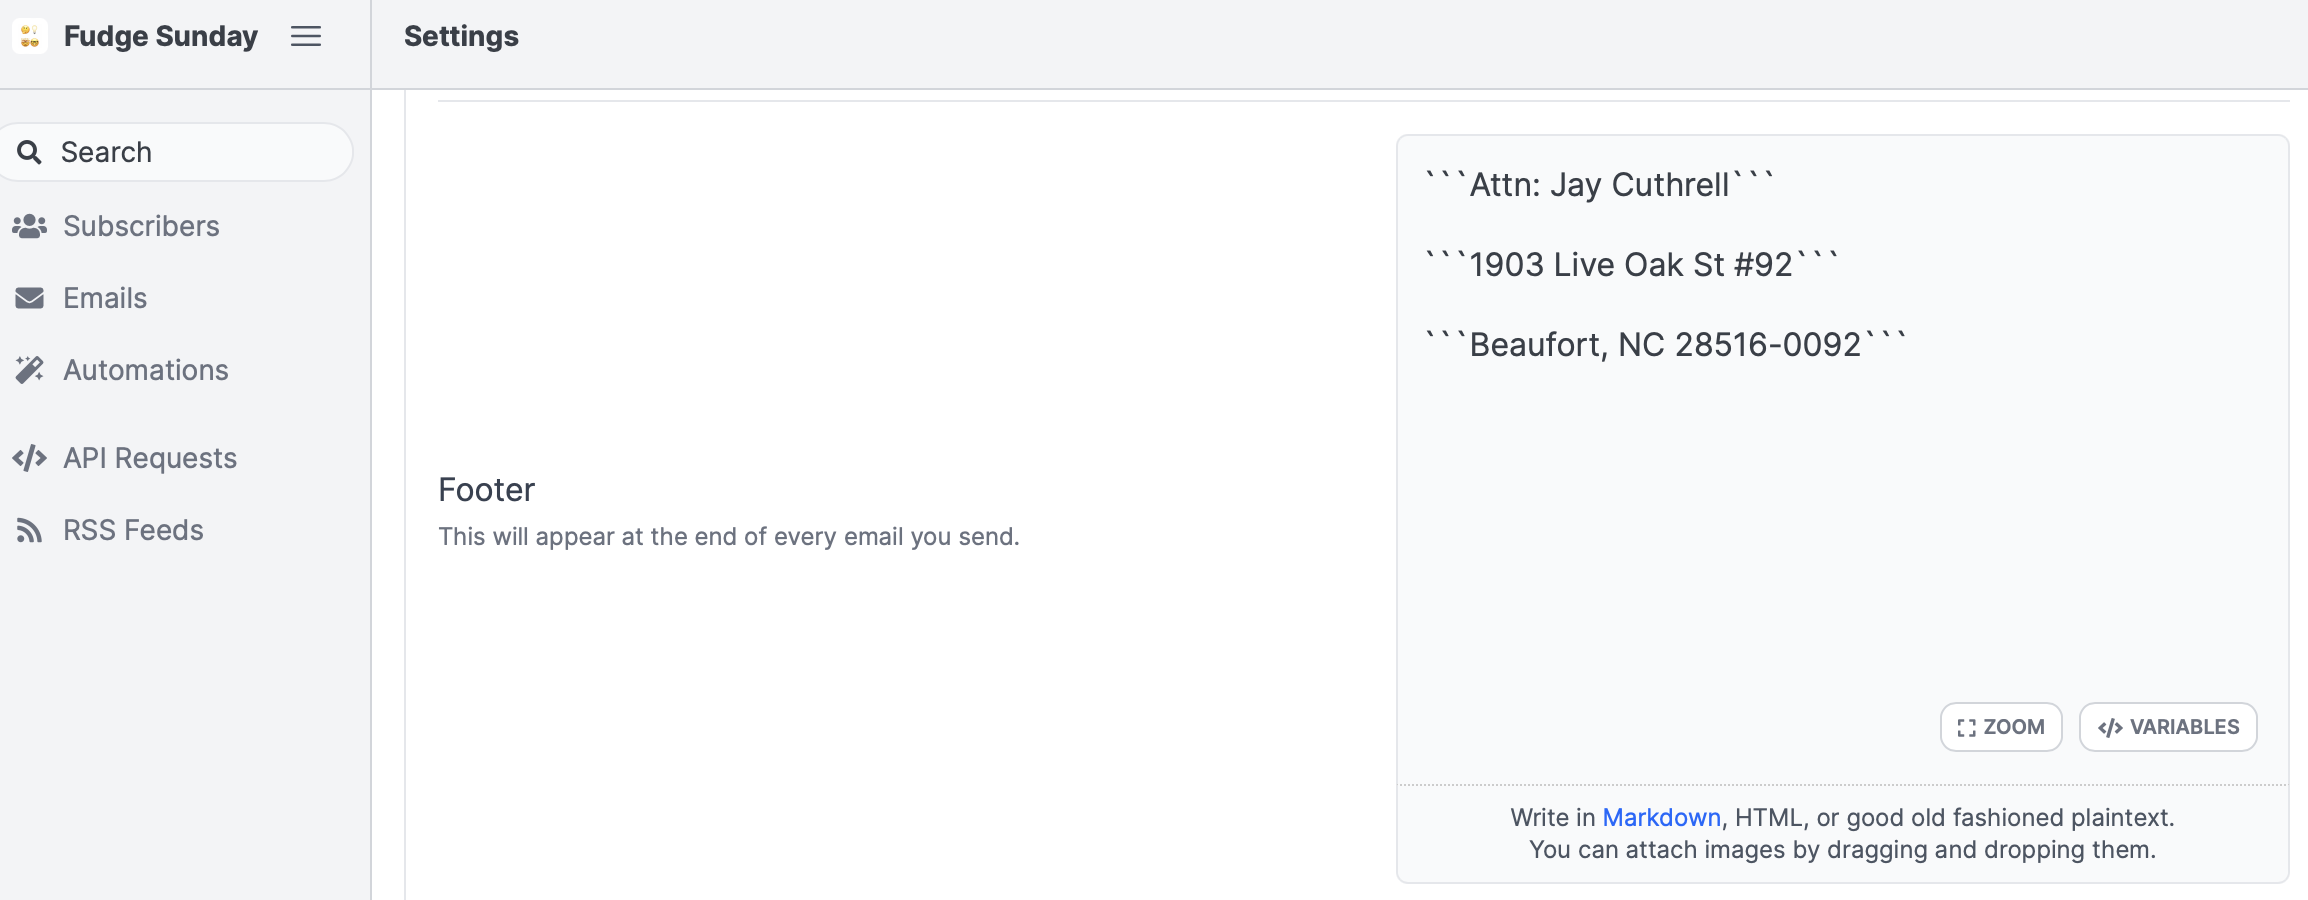 Design(Email) Footer customization